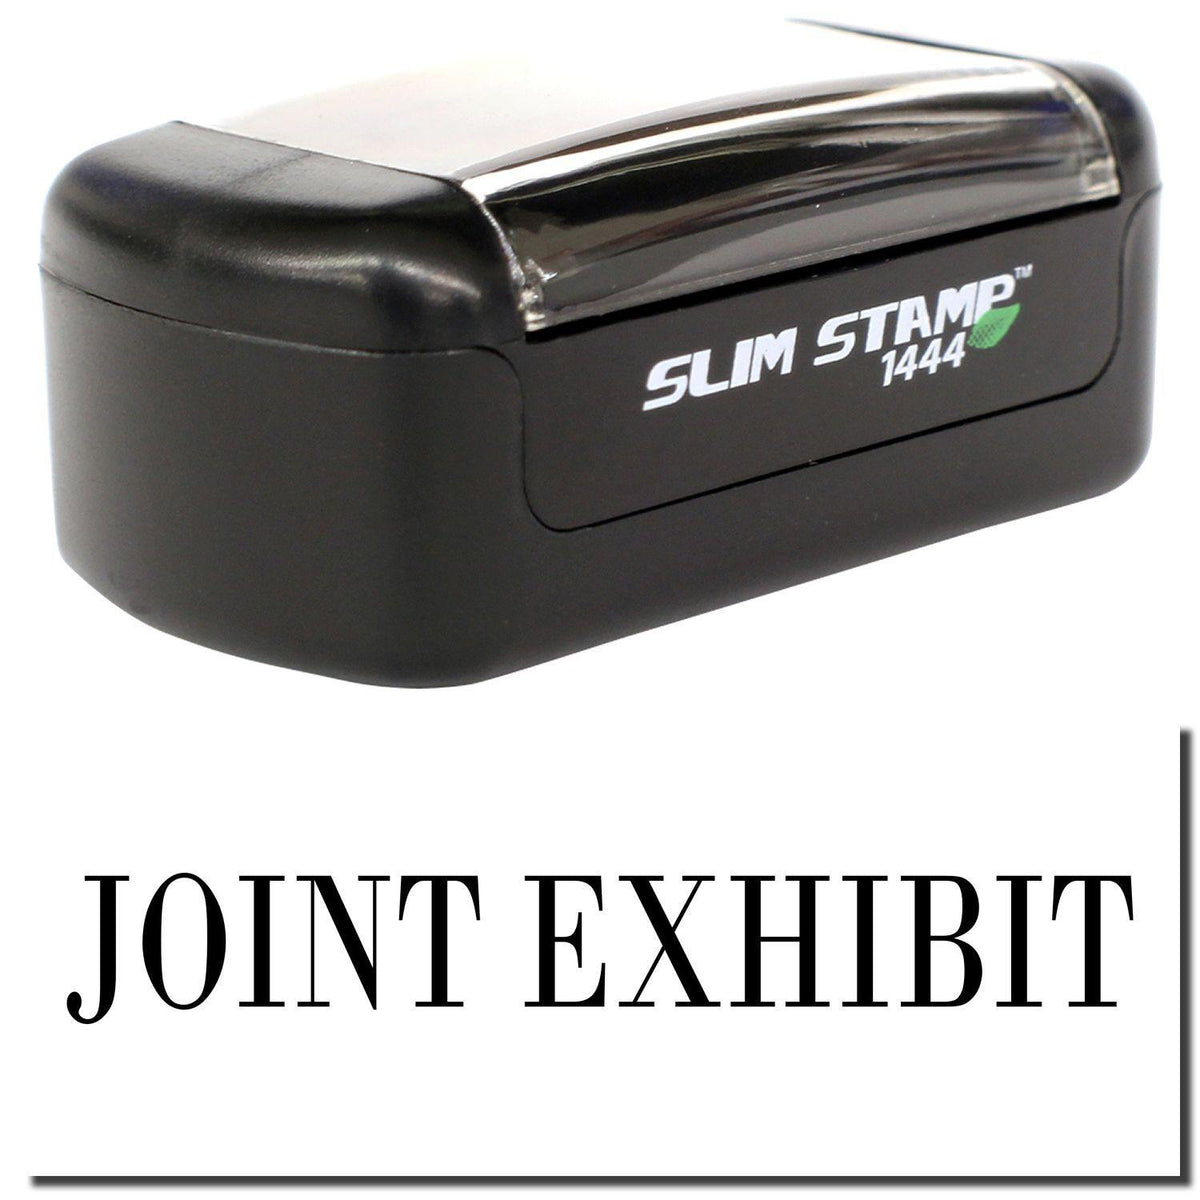 A stock office pre-inked stamp with a stamped image showing how the text &quot;JOINT EXHIBIT&quot; is displayed after stamping.